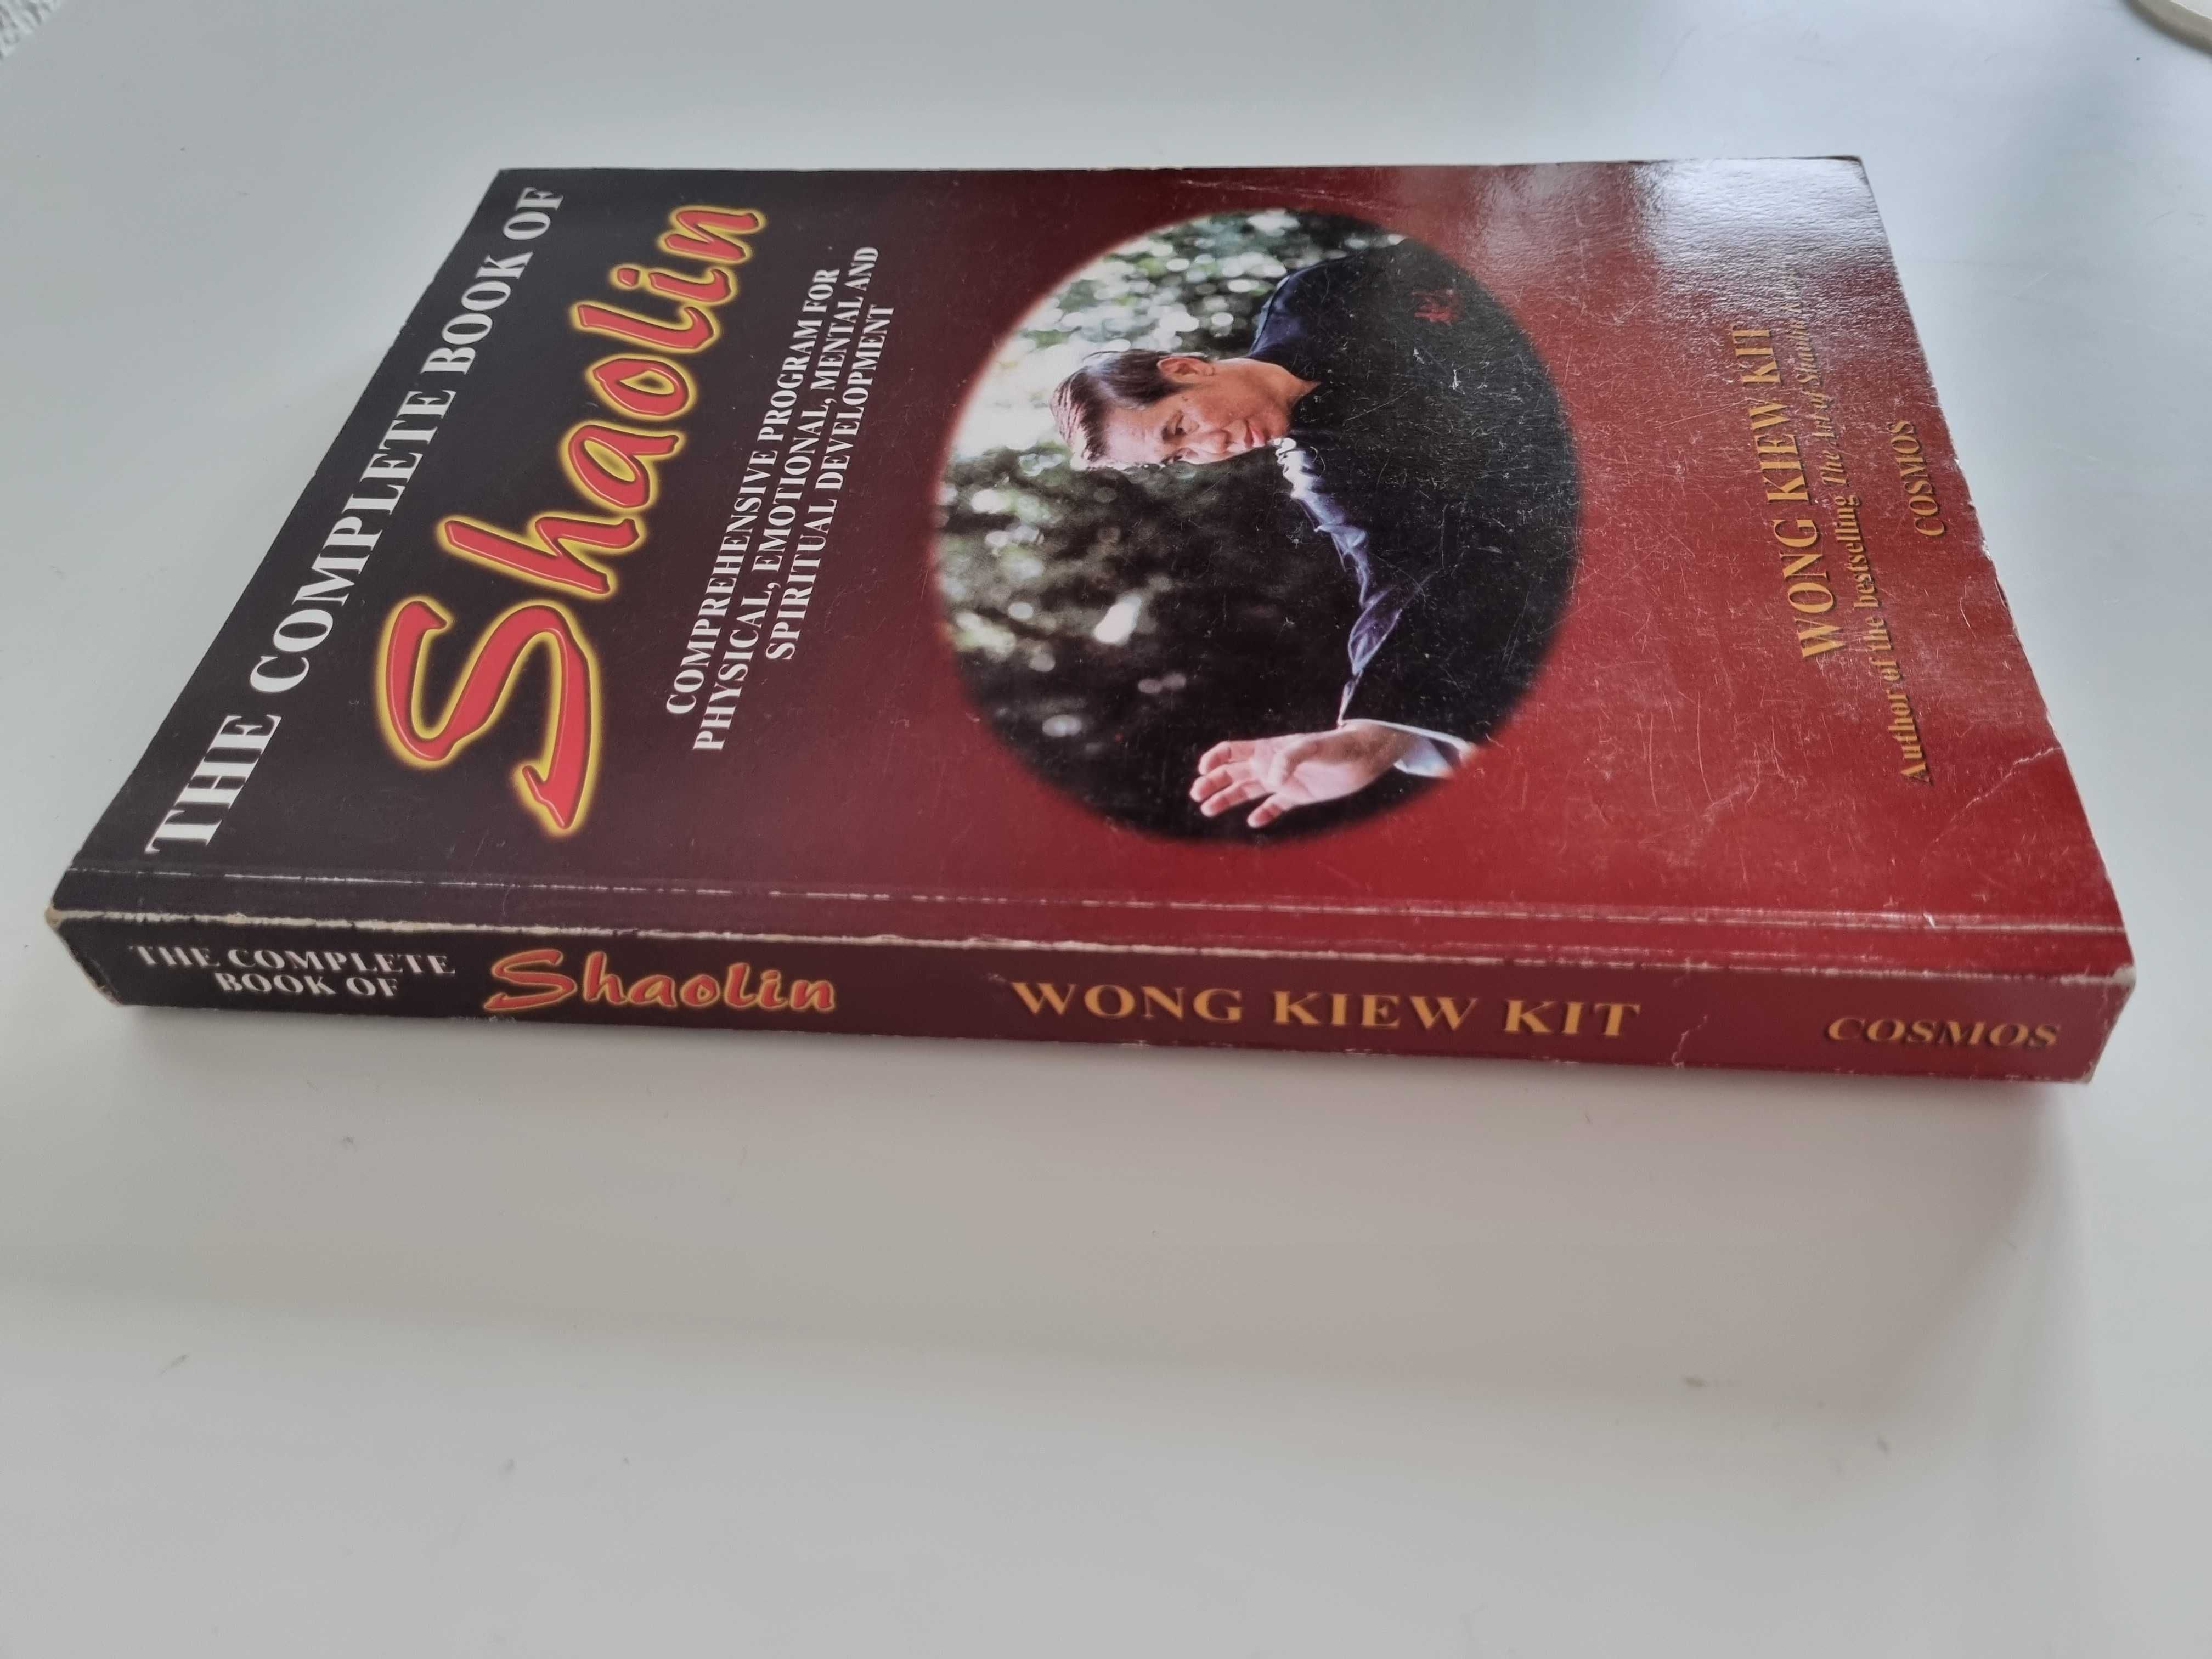 The Complete Book of Shaolin